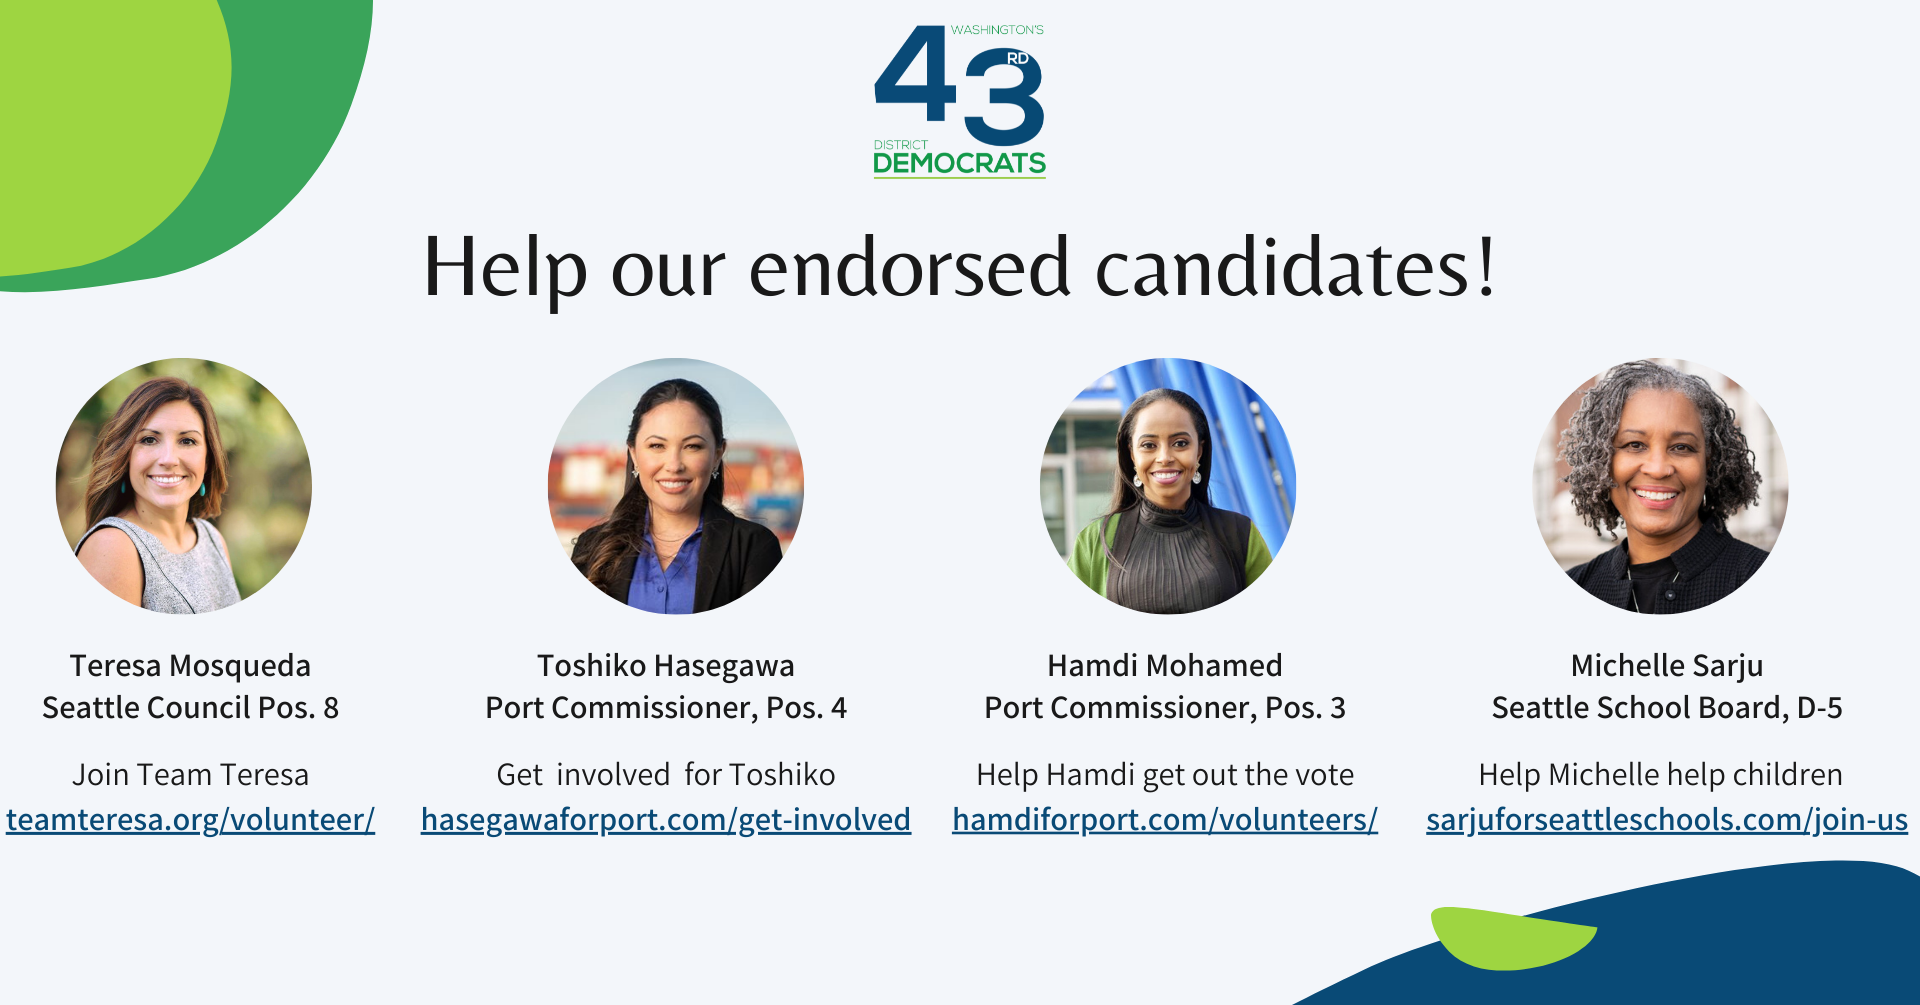 Help our endorsed candidates!